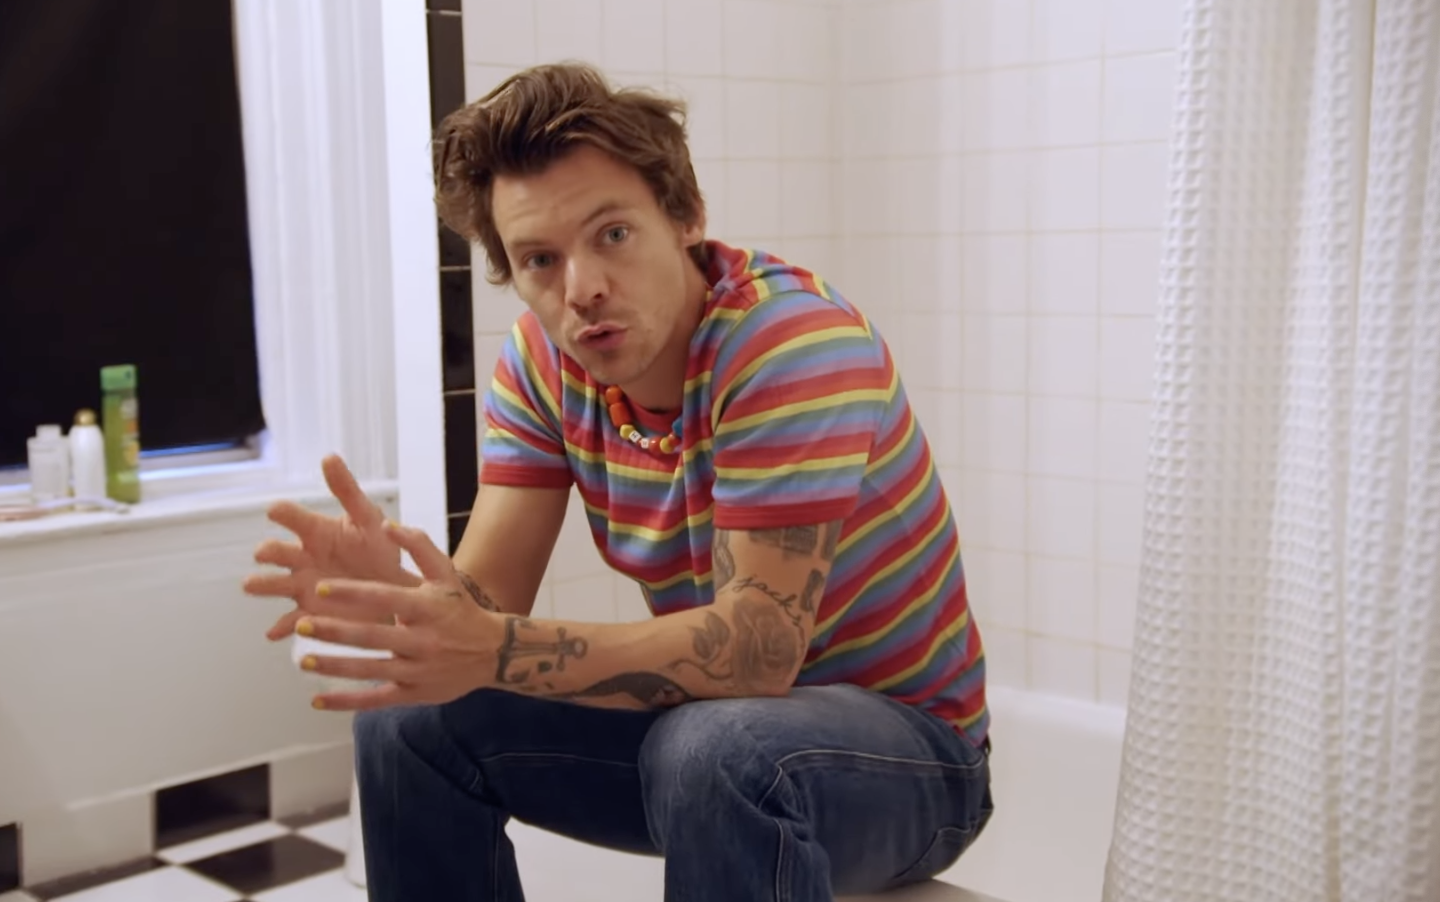 Styles sits on the perch of the tub, talking to the camera